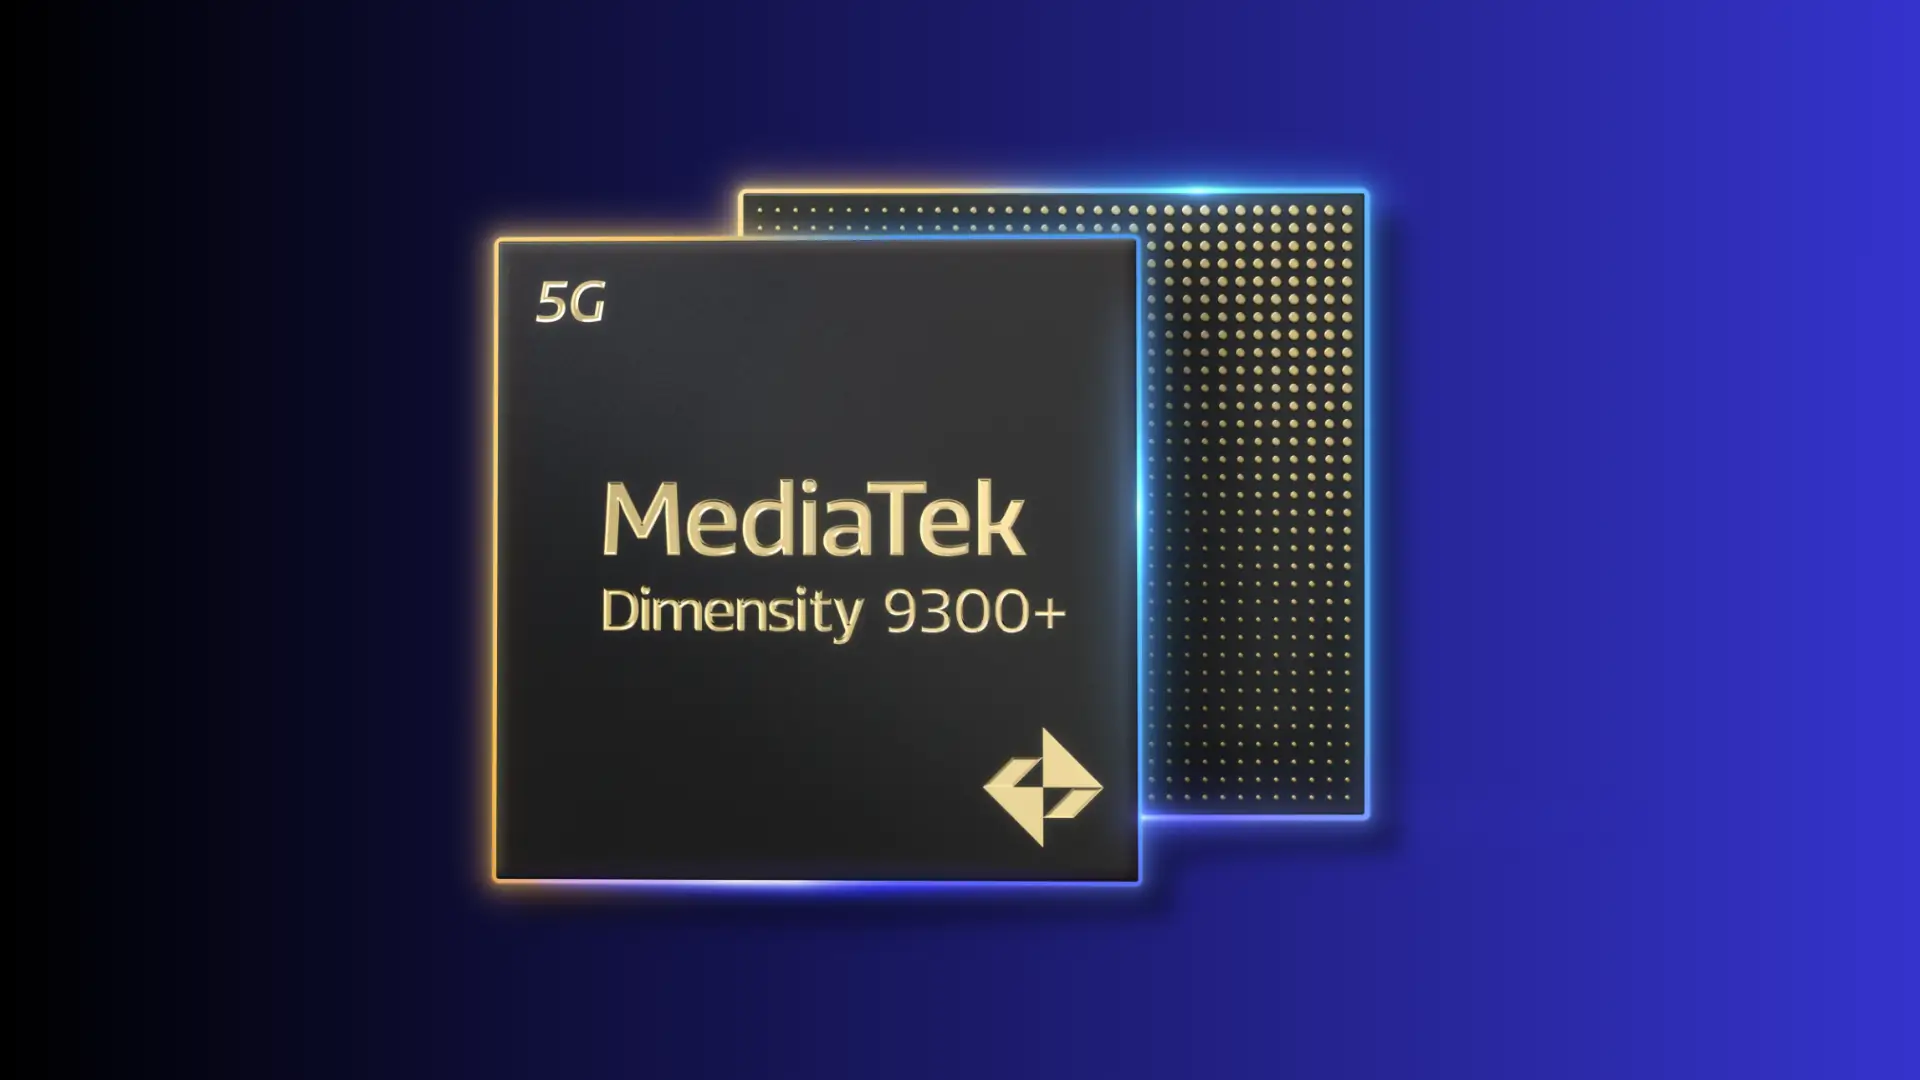 Meditek launches Dimensity 9300+; clocks at 3.4GHz with improved efficiency